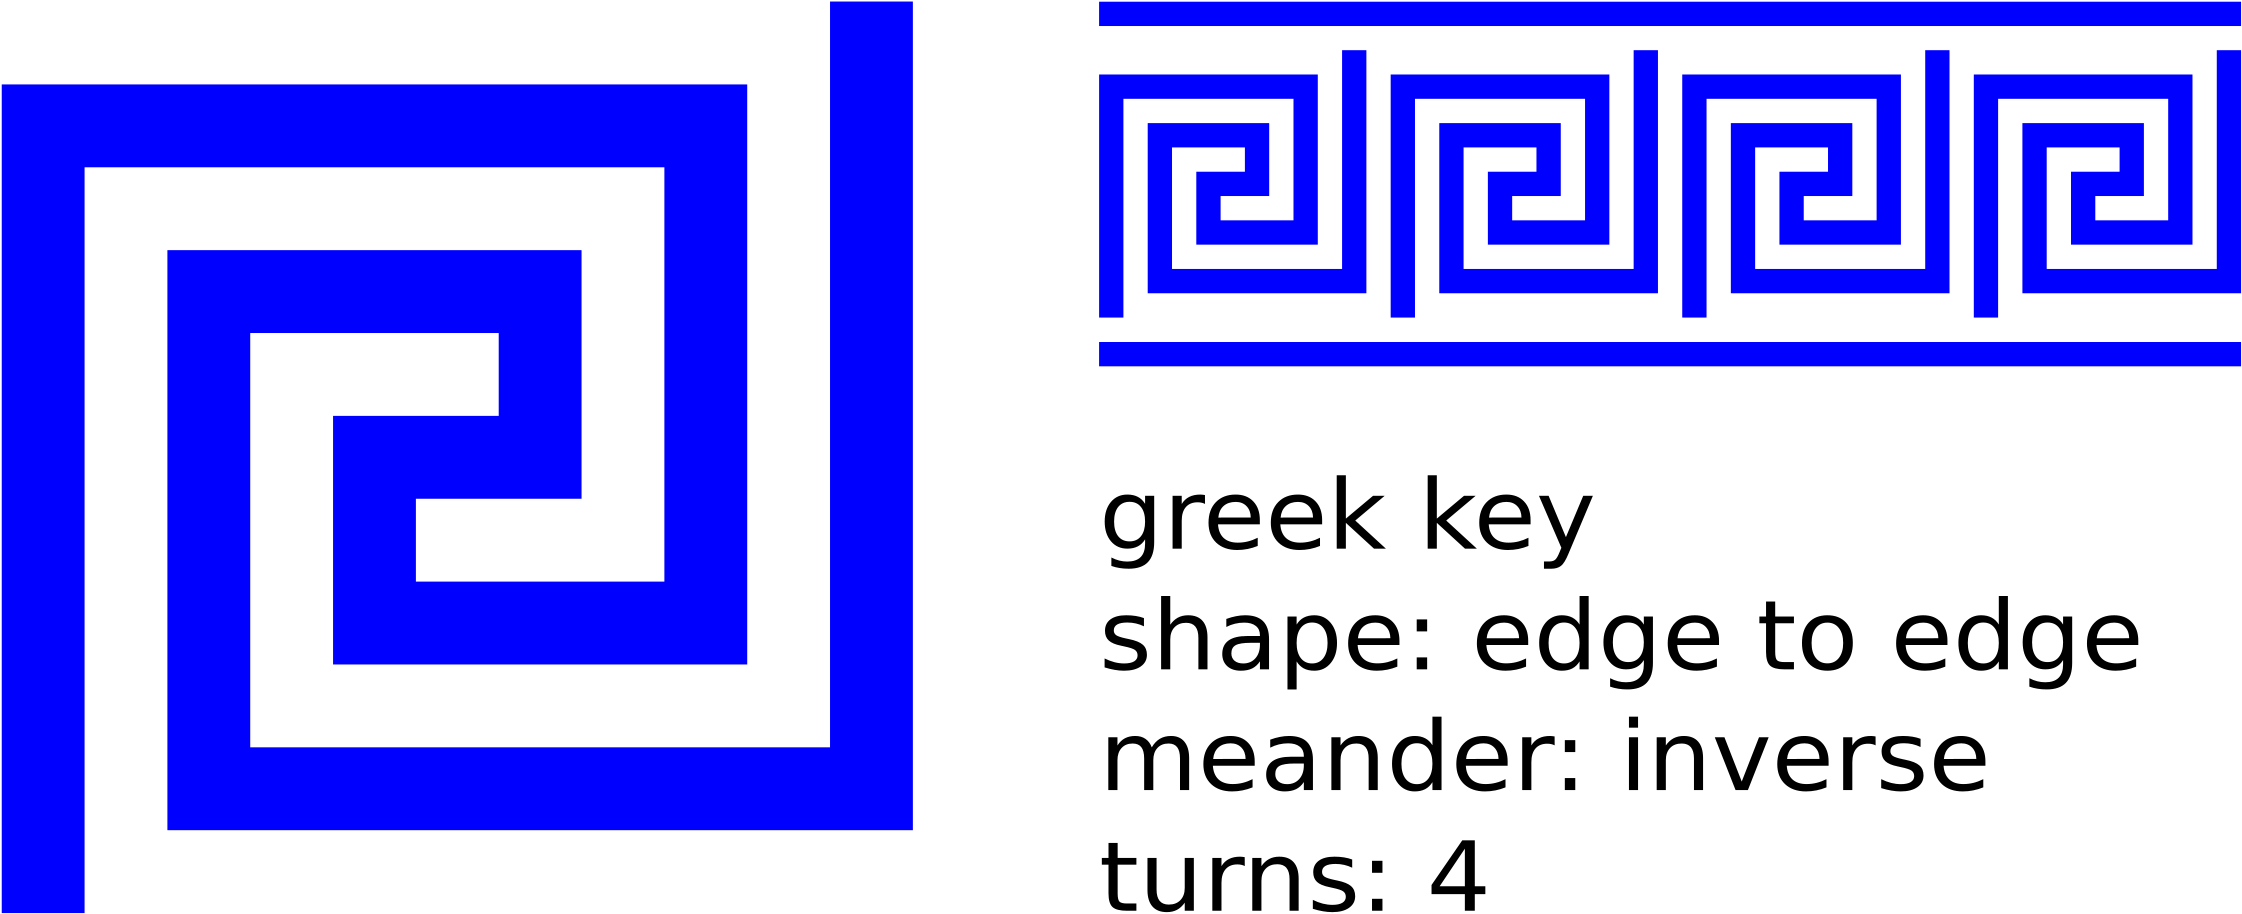 A Blue And Black Square With A Spiral